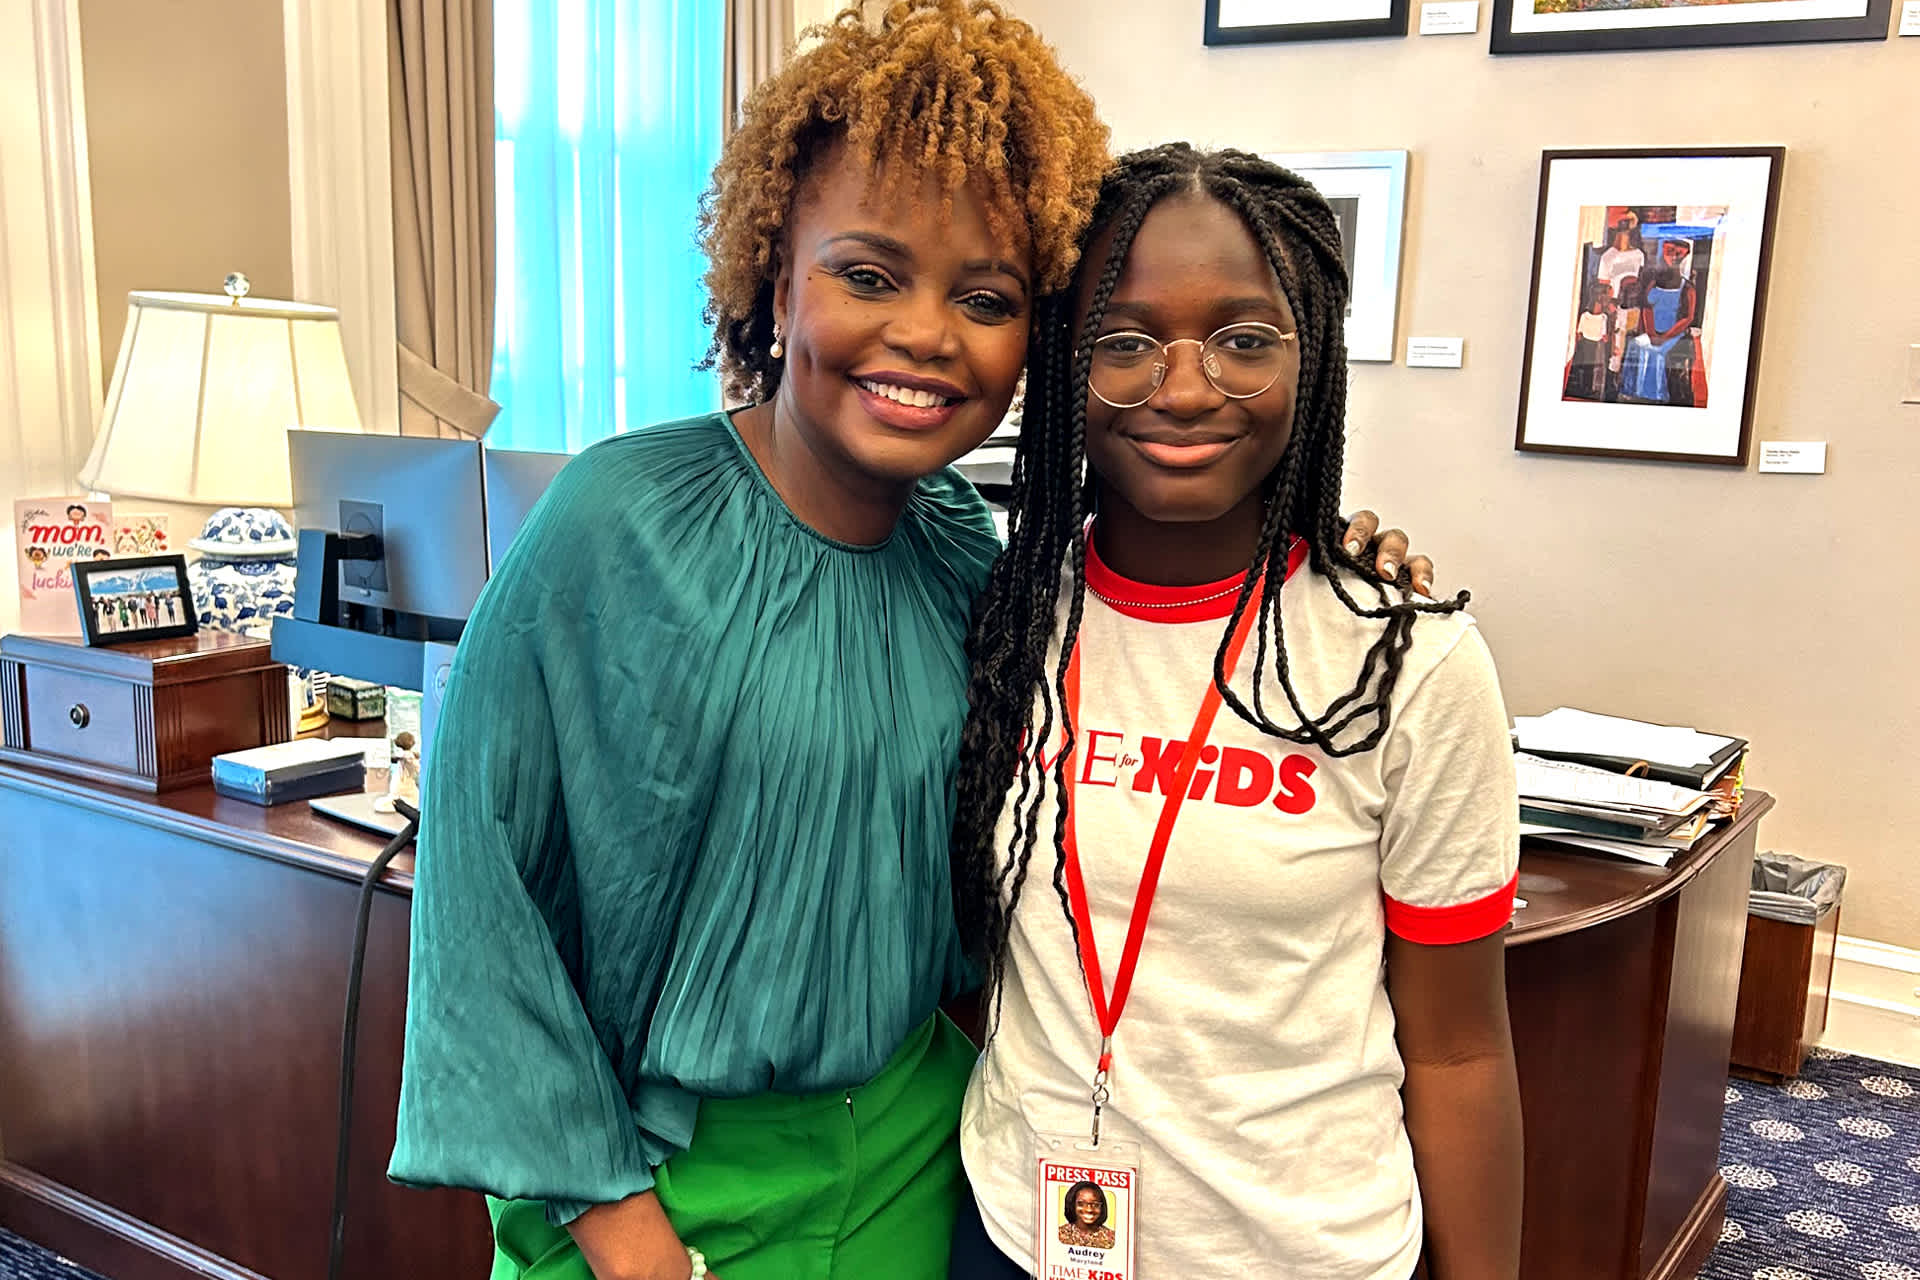 A Black woman and girl standing together in an office smiling.